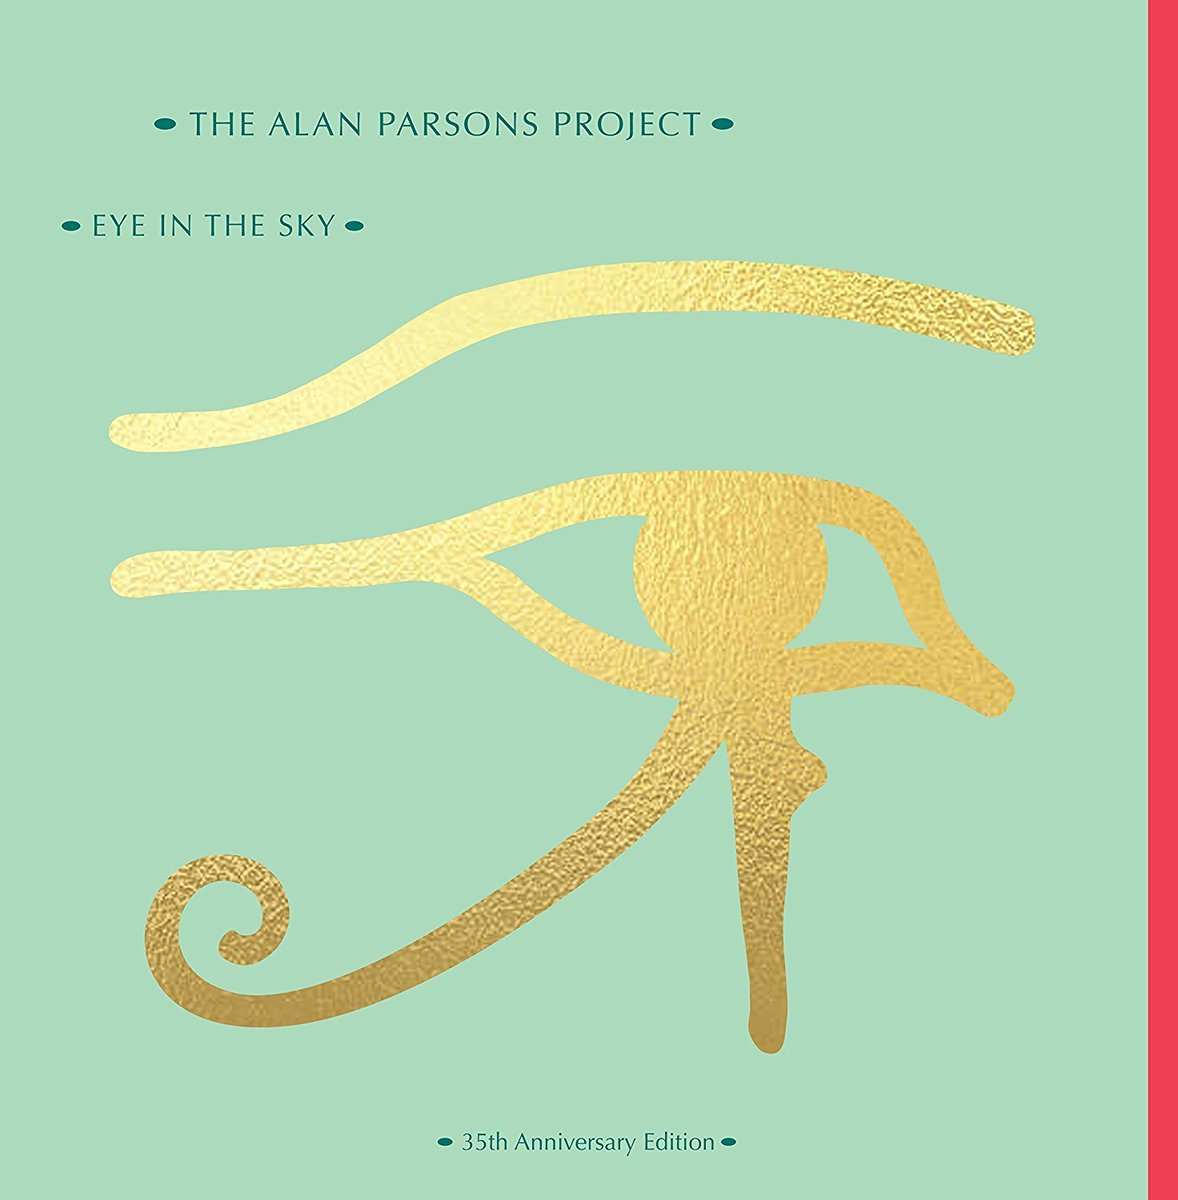 THE ALAN PARSONS PROJEC - Eye In The Sky (1982)

#NowPlaying #clapssicrock #classicrock #80smusic #rock #TheAlanParsonsProject

 music.youtube.com/watch?v=jEILGY… via @YouTubeMusic